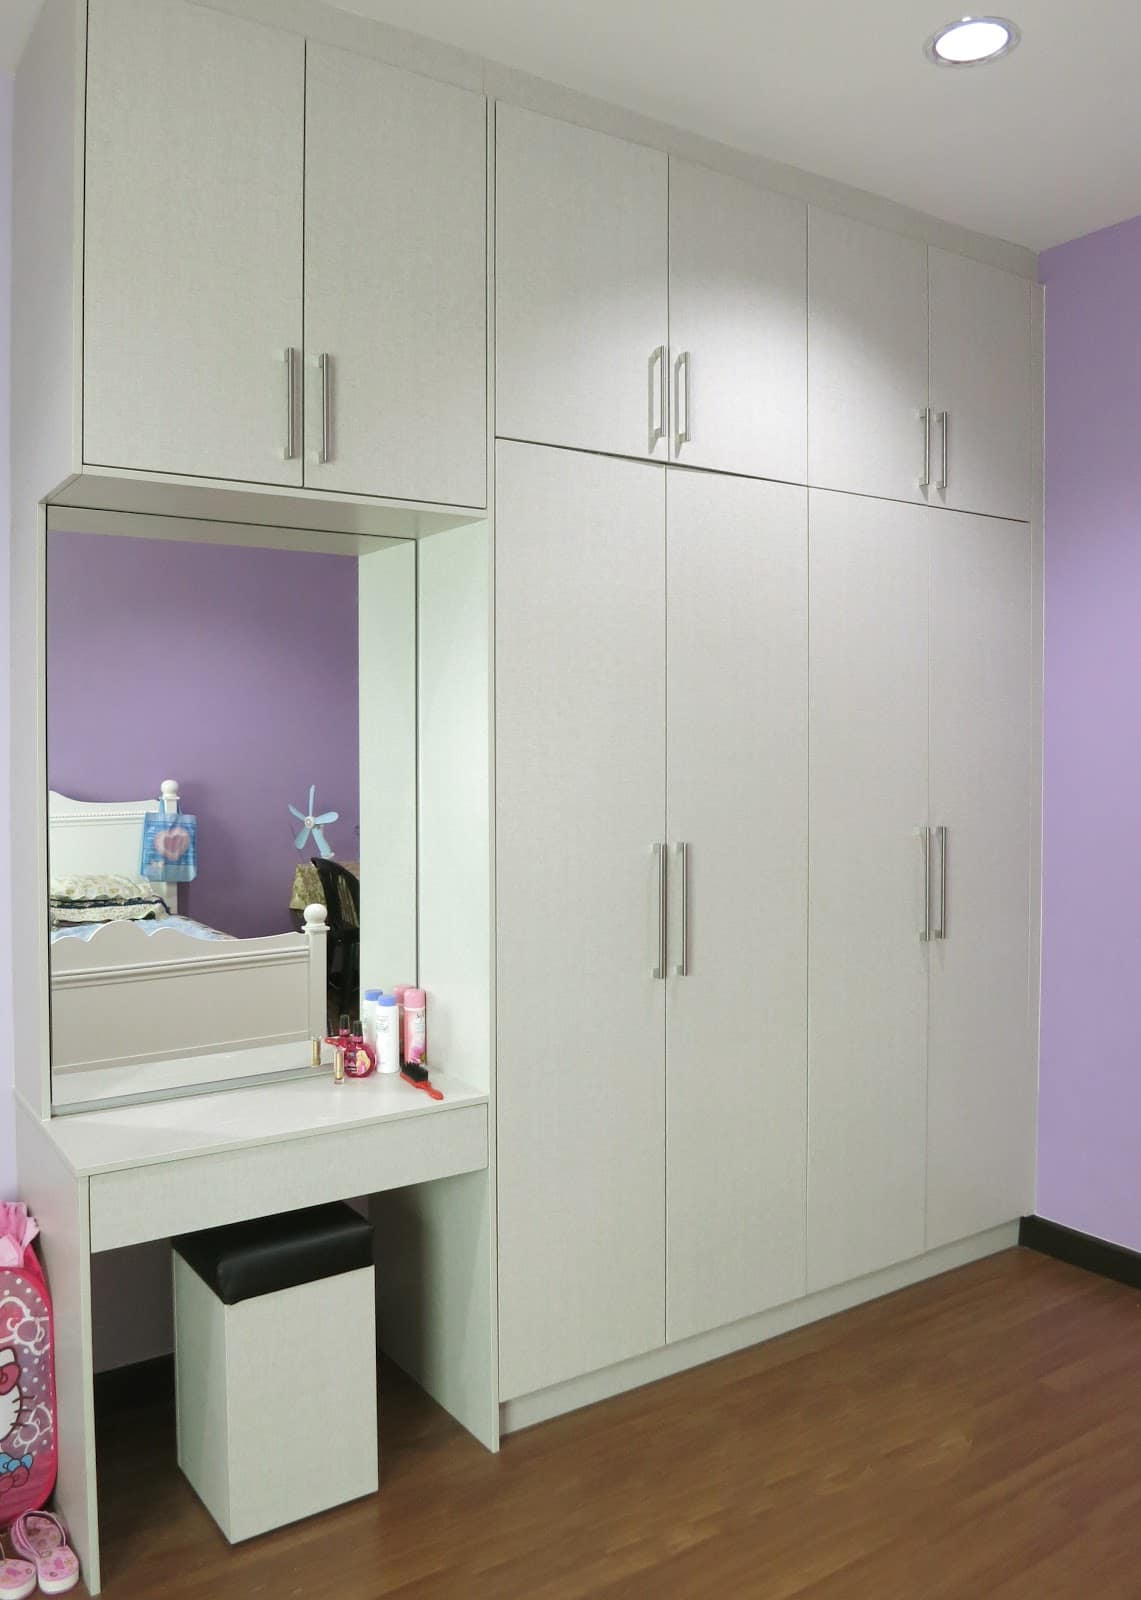 Above: Ceiling height built-in wardrobe with mirror vanity. By Intech Kitchen